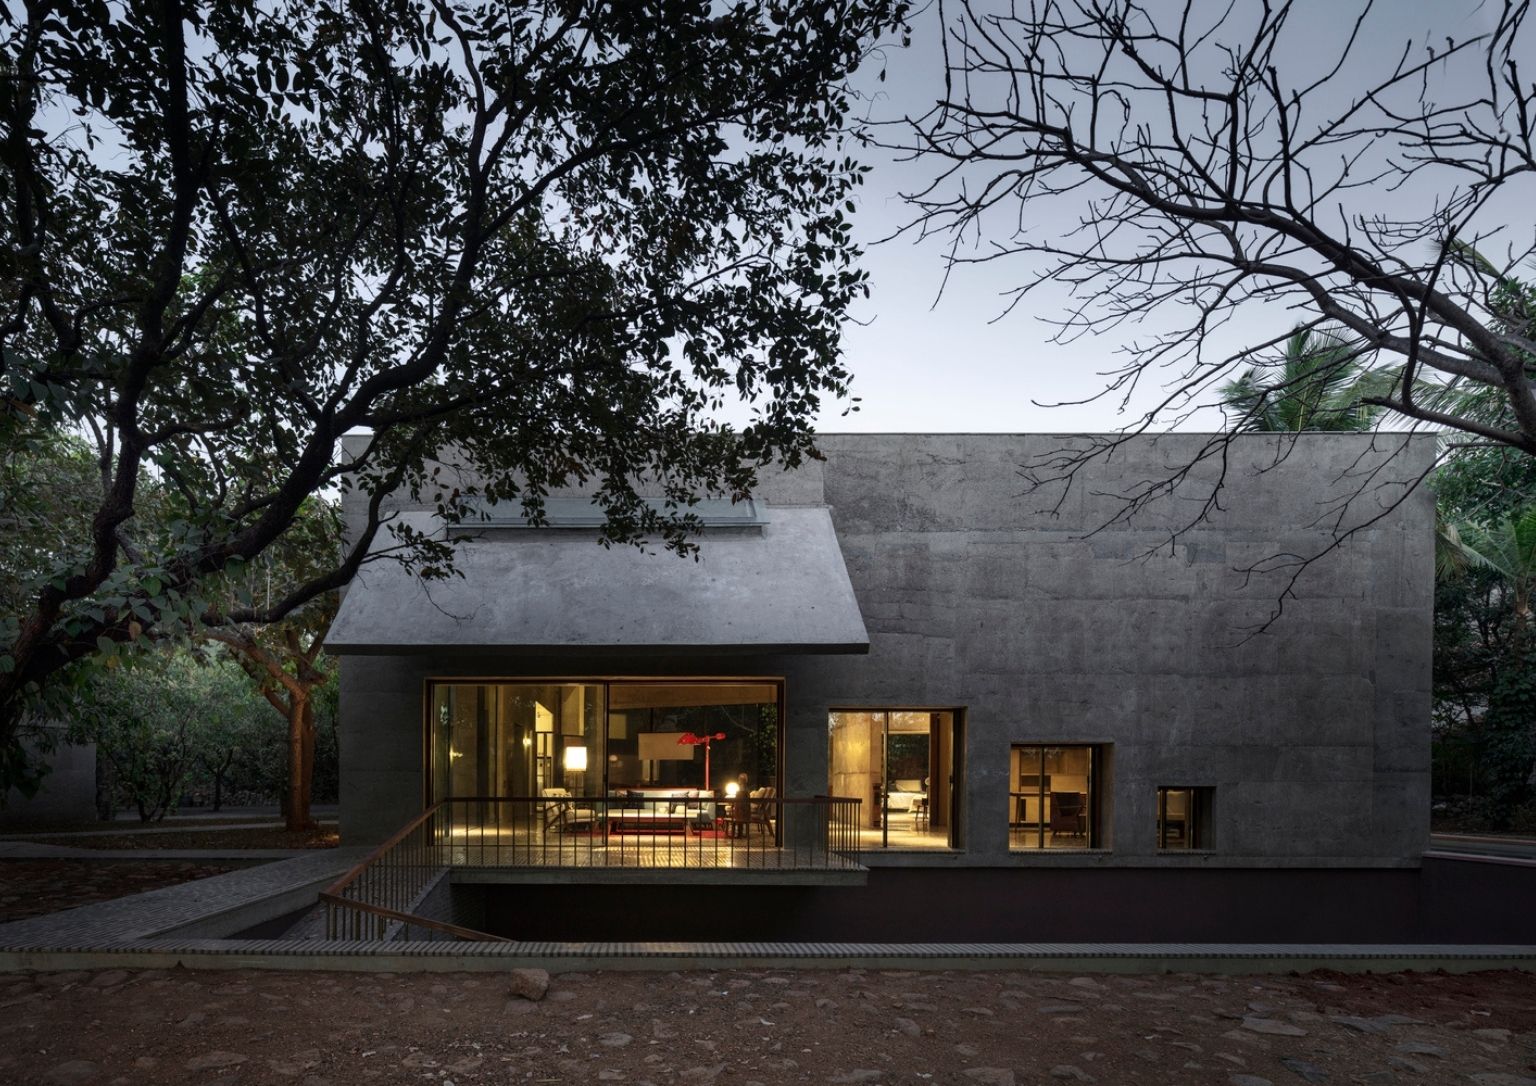 A minimalist concrete home lit from inside with warm yellow lights surrounded by trees.